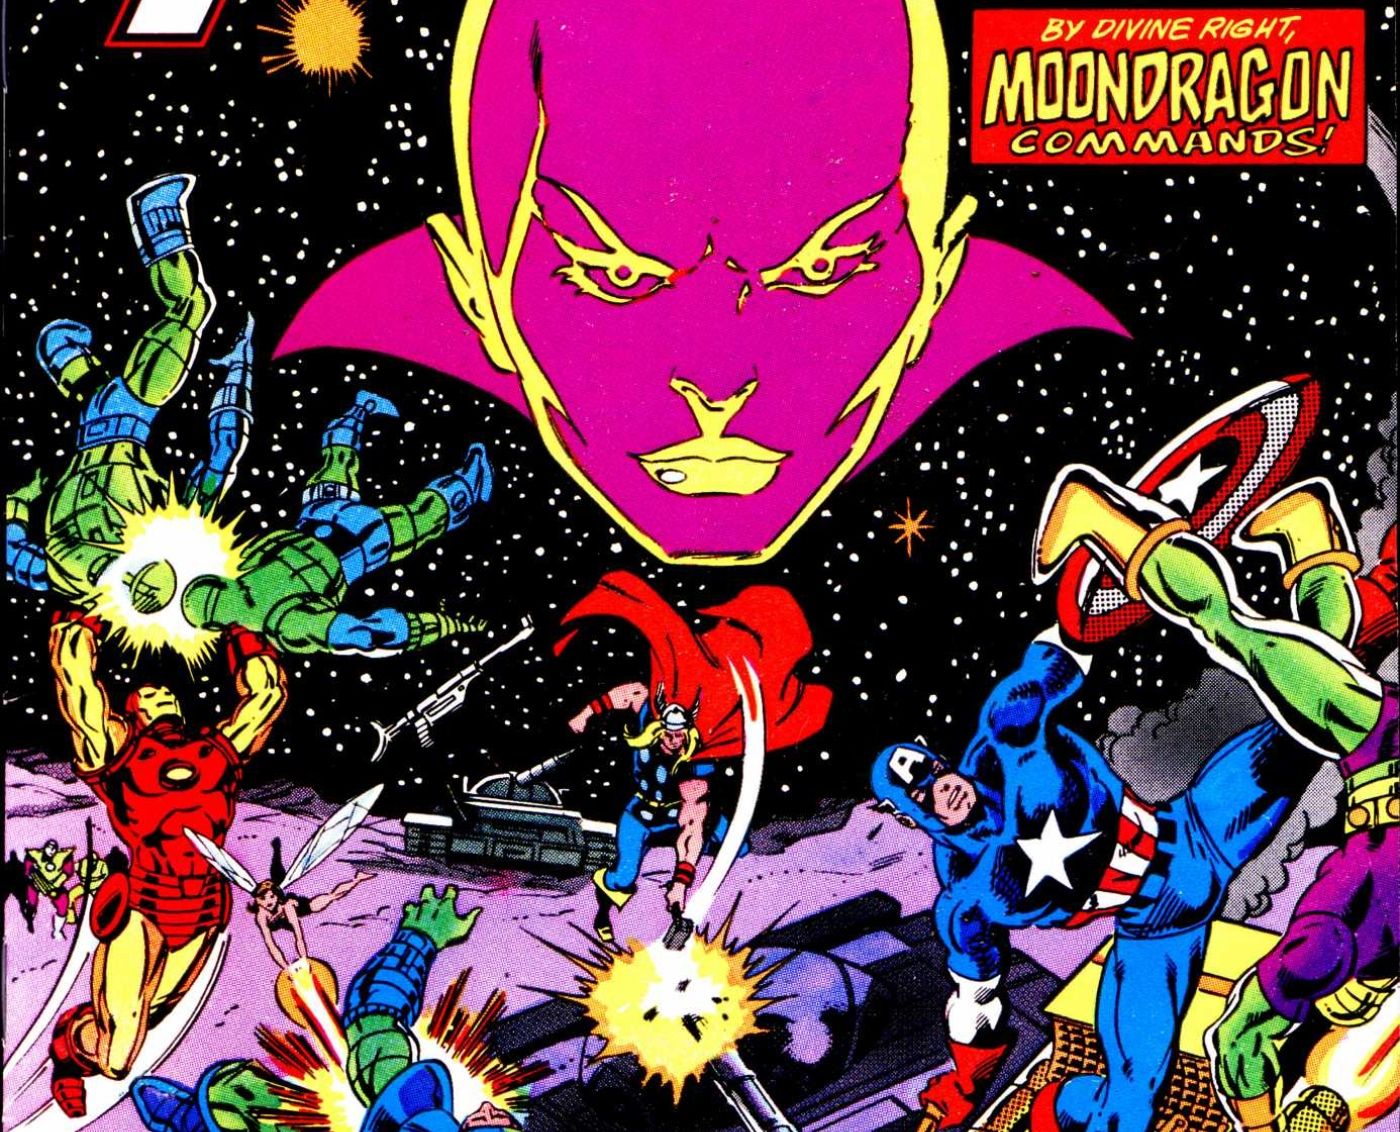 Moondragon taking on the entire Avengers roster.